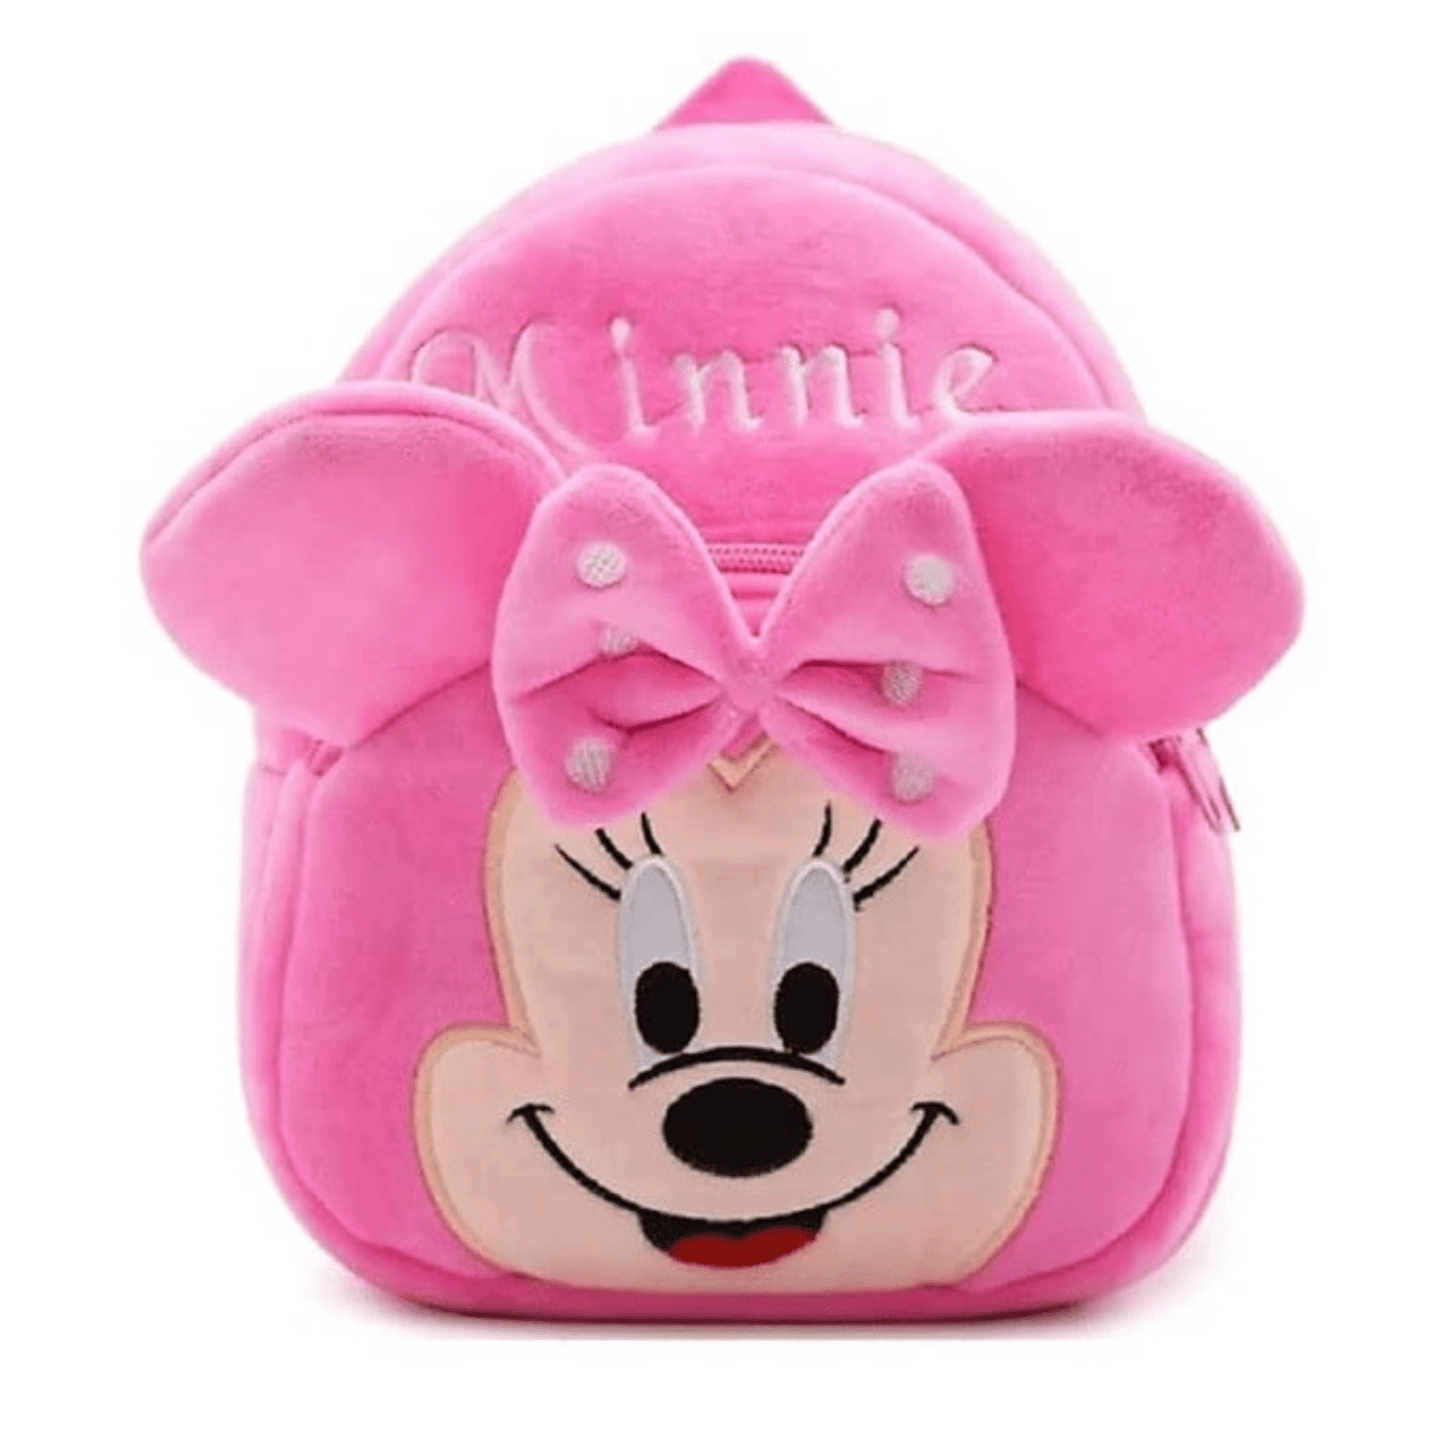 Minnie School Bag  Backpack for kids 2 to 5 years